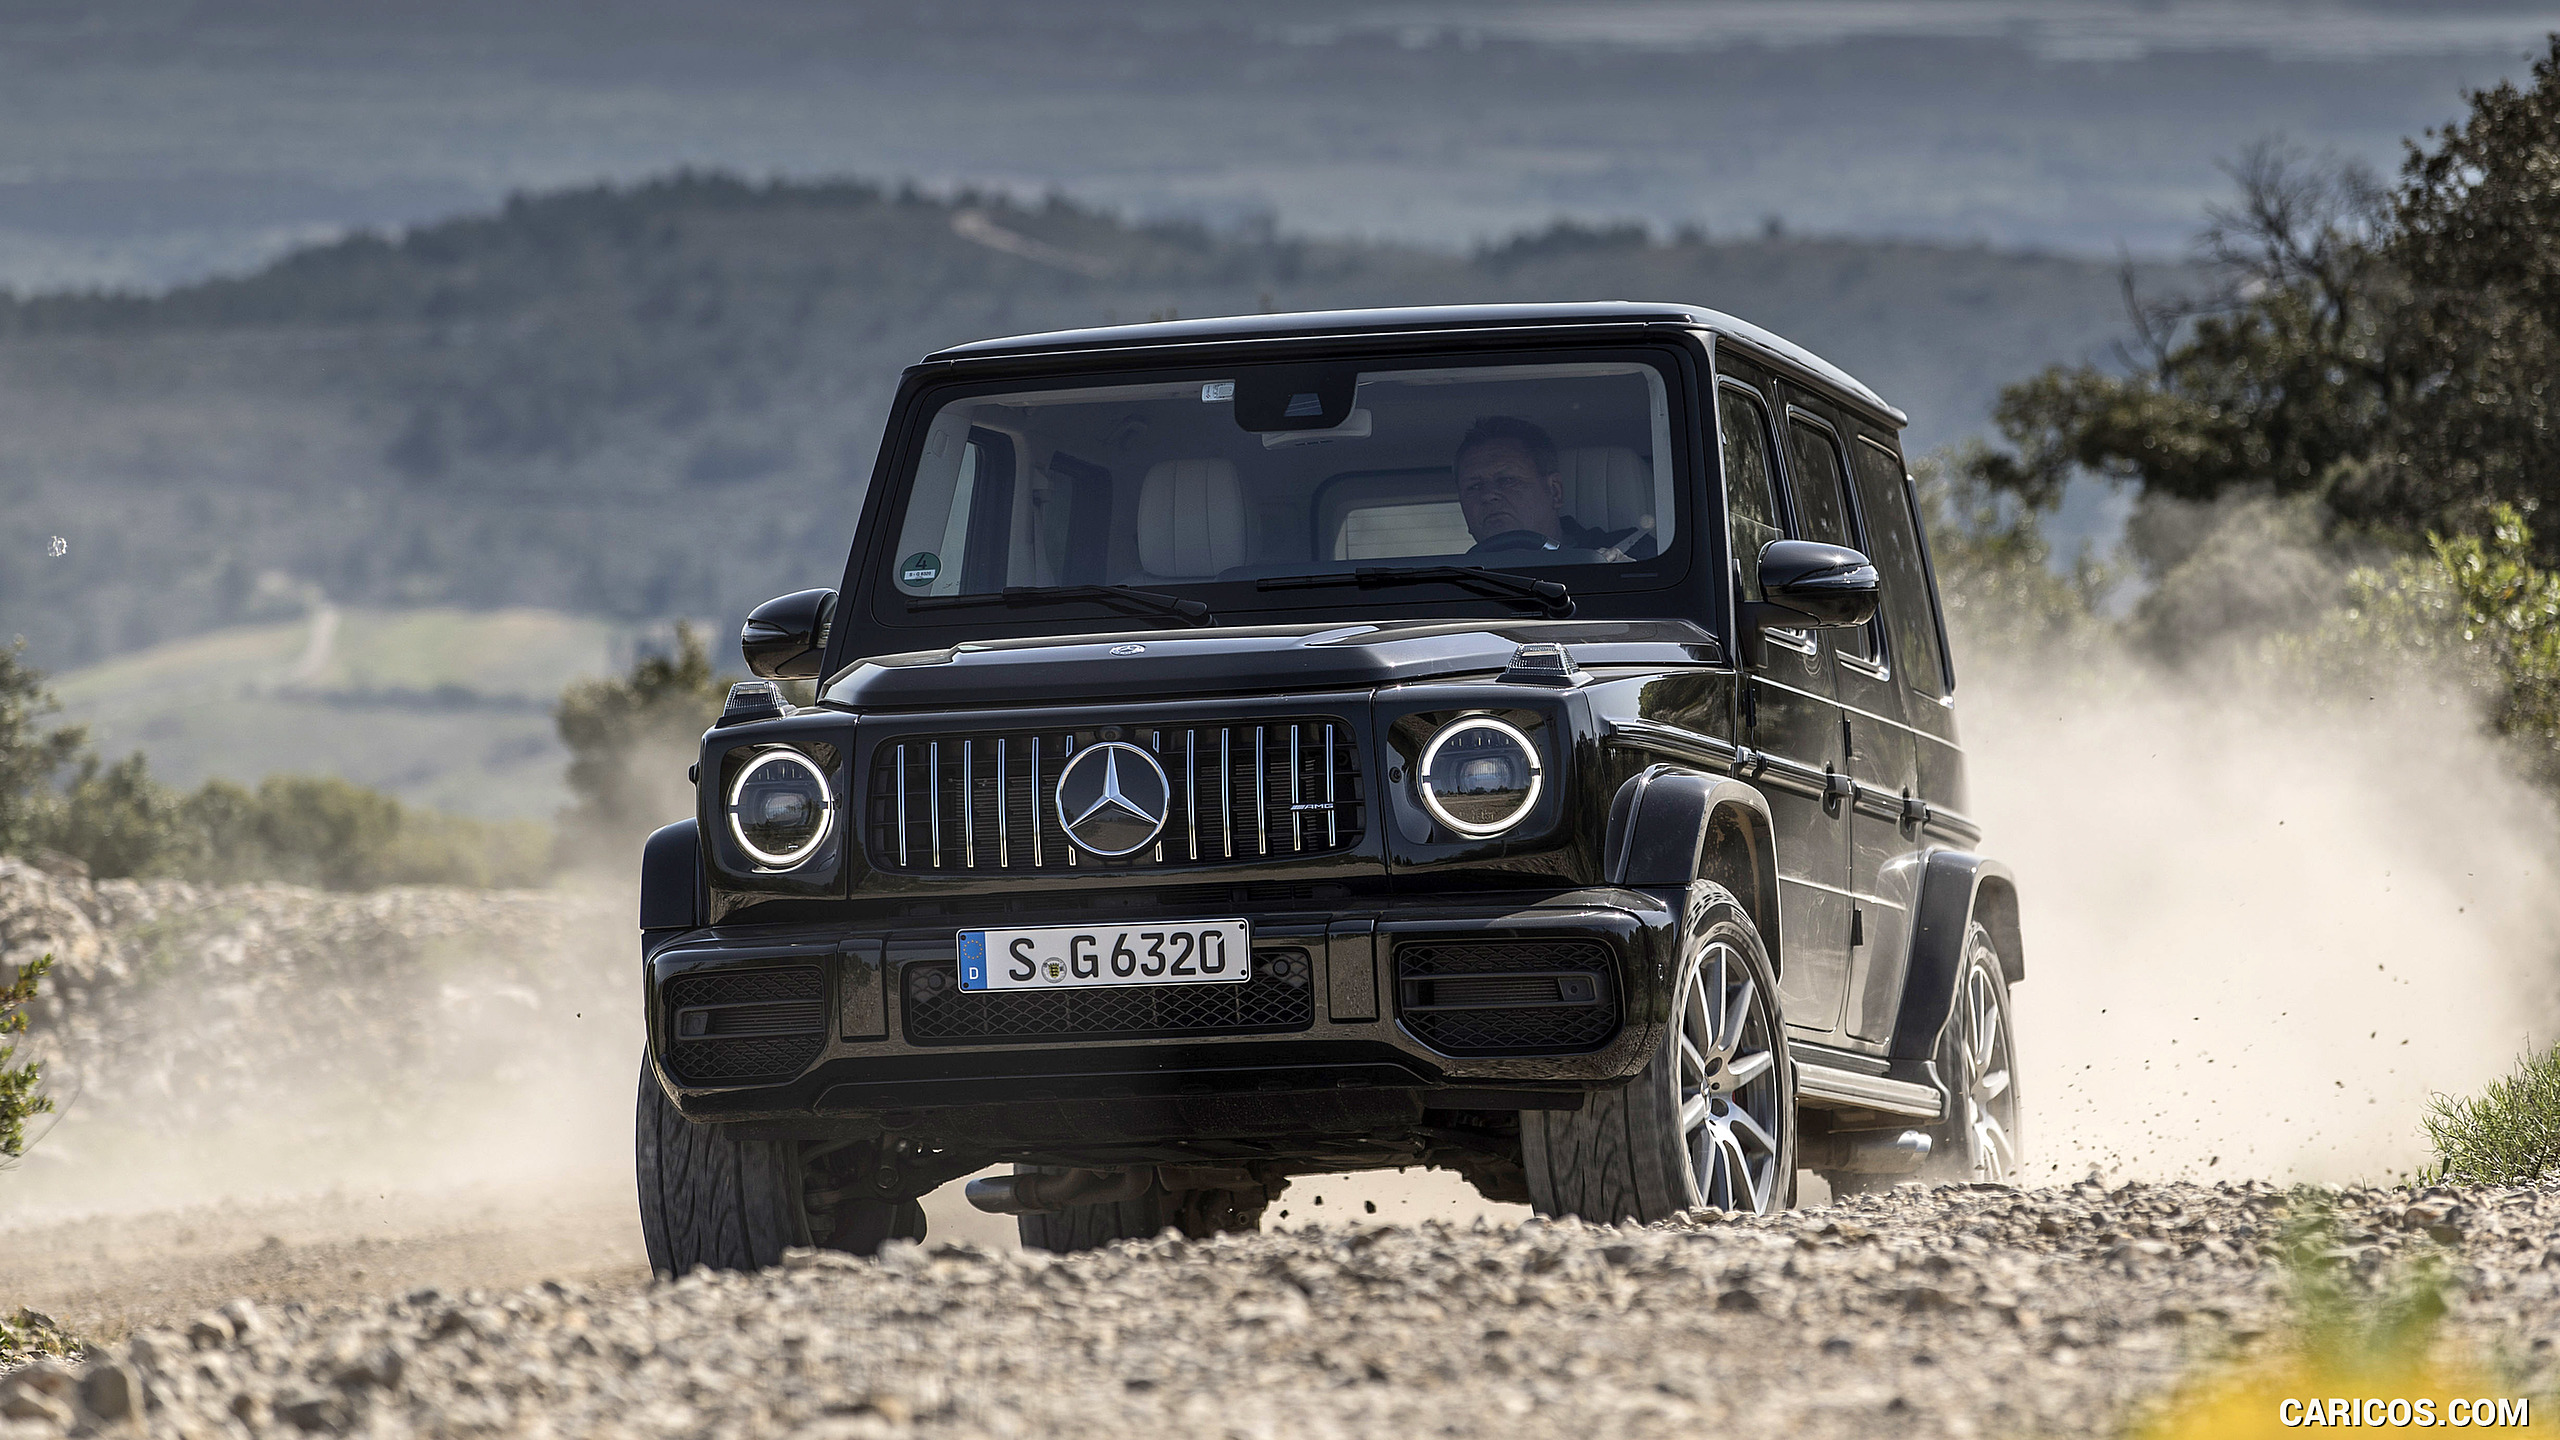 2019 Mercedes-AMG G63 - Off-Road, #275 of 452